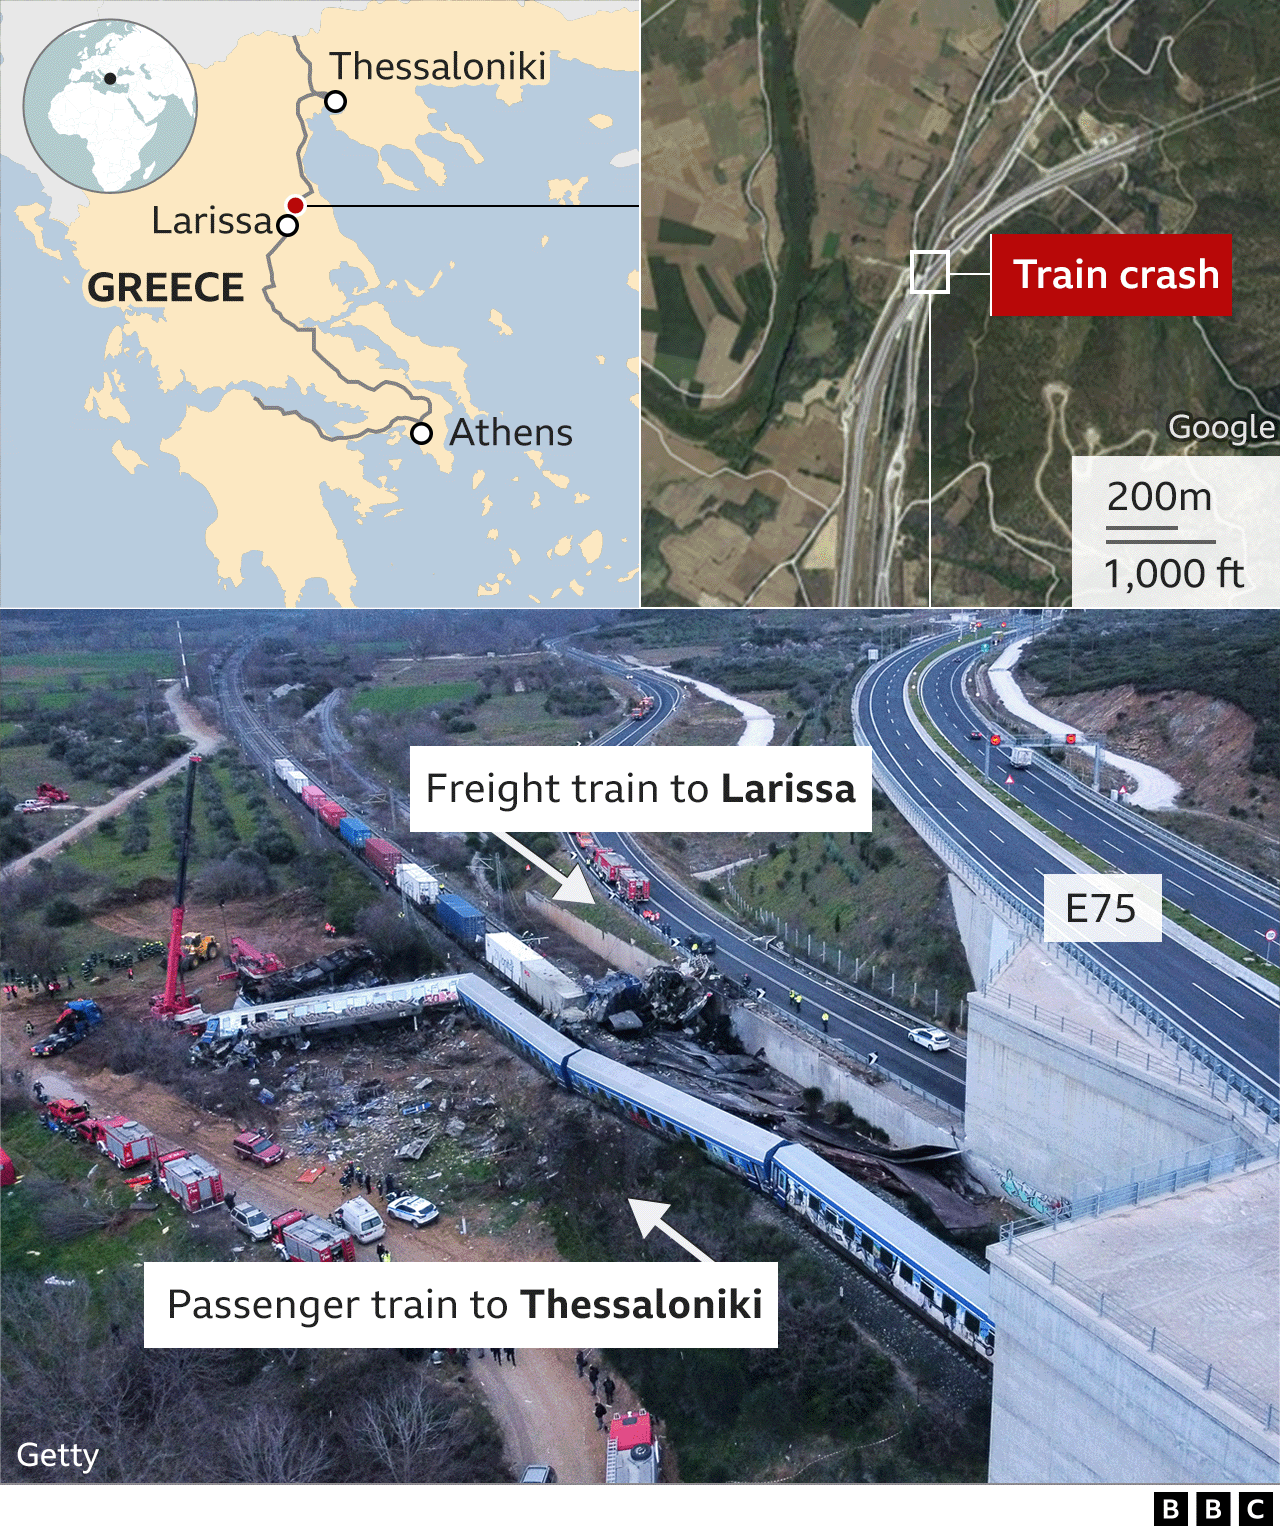 Image shows map of train crash and direction of trains travelling